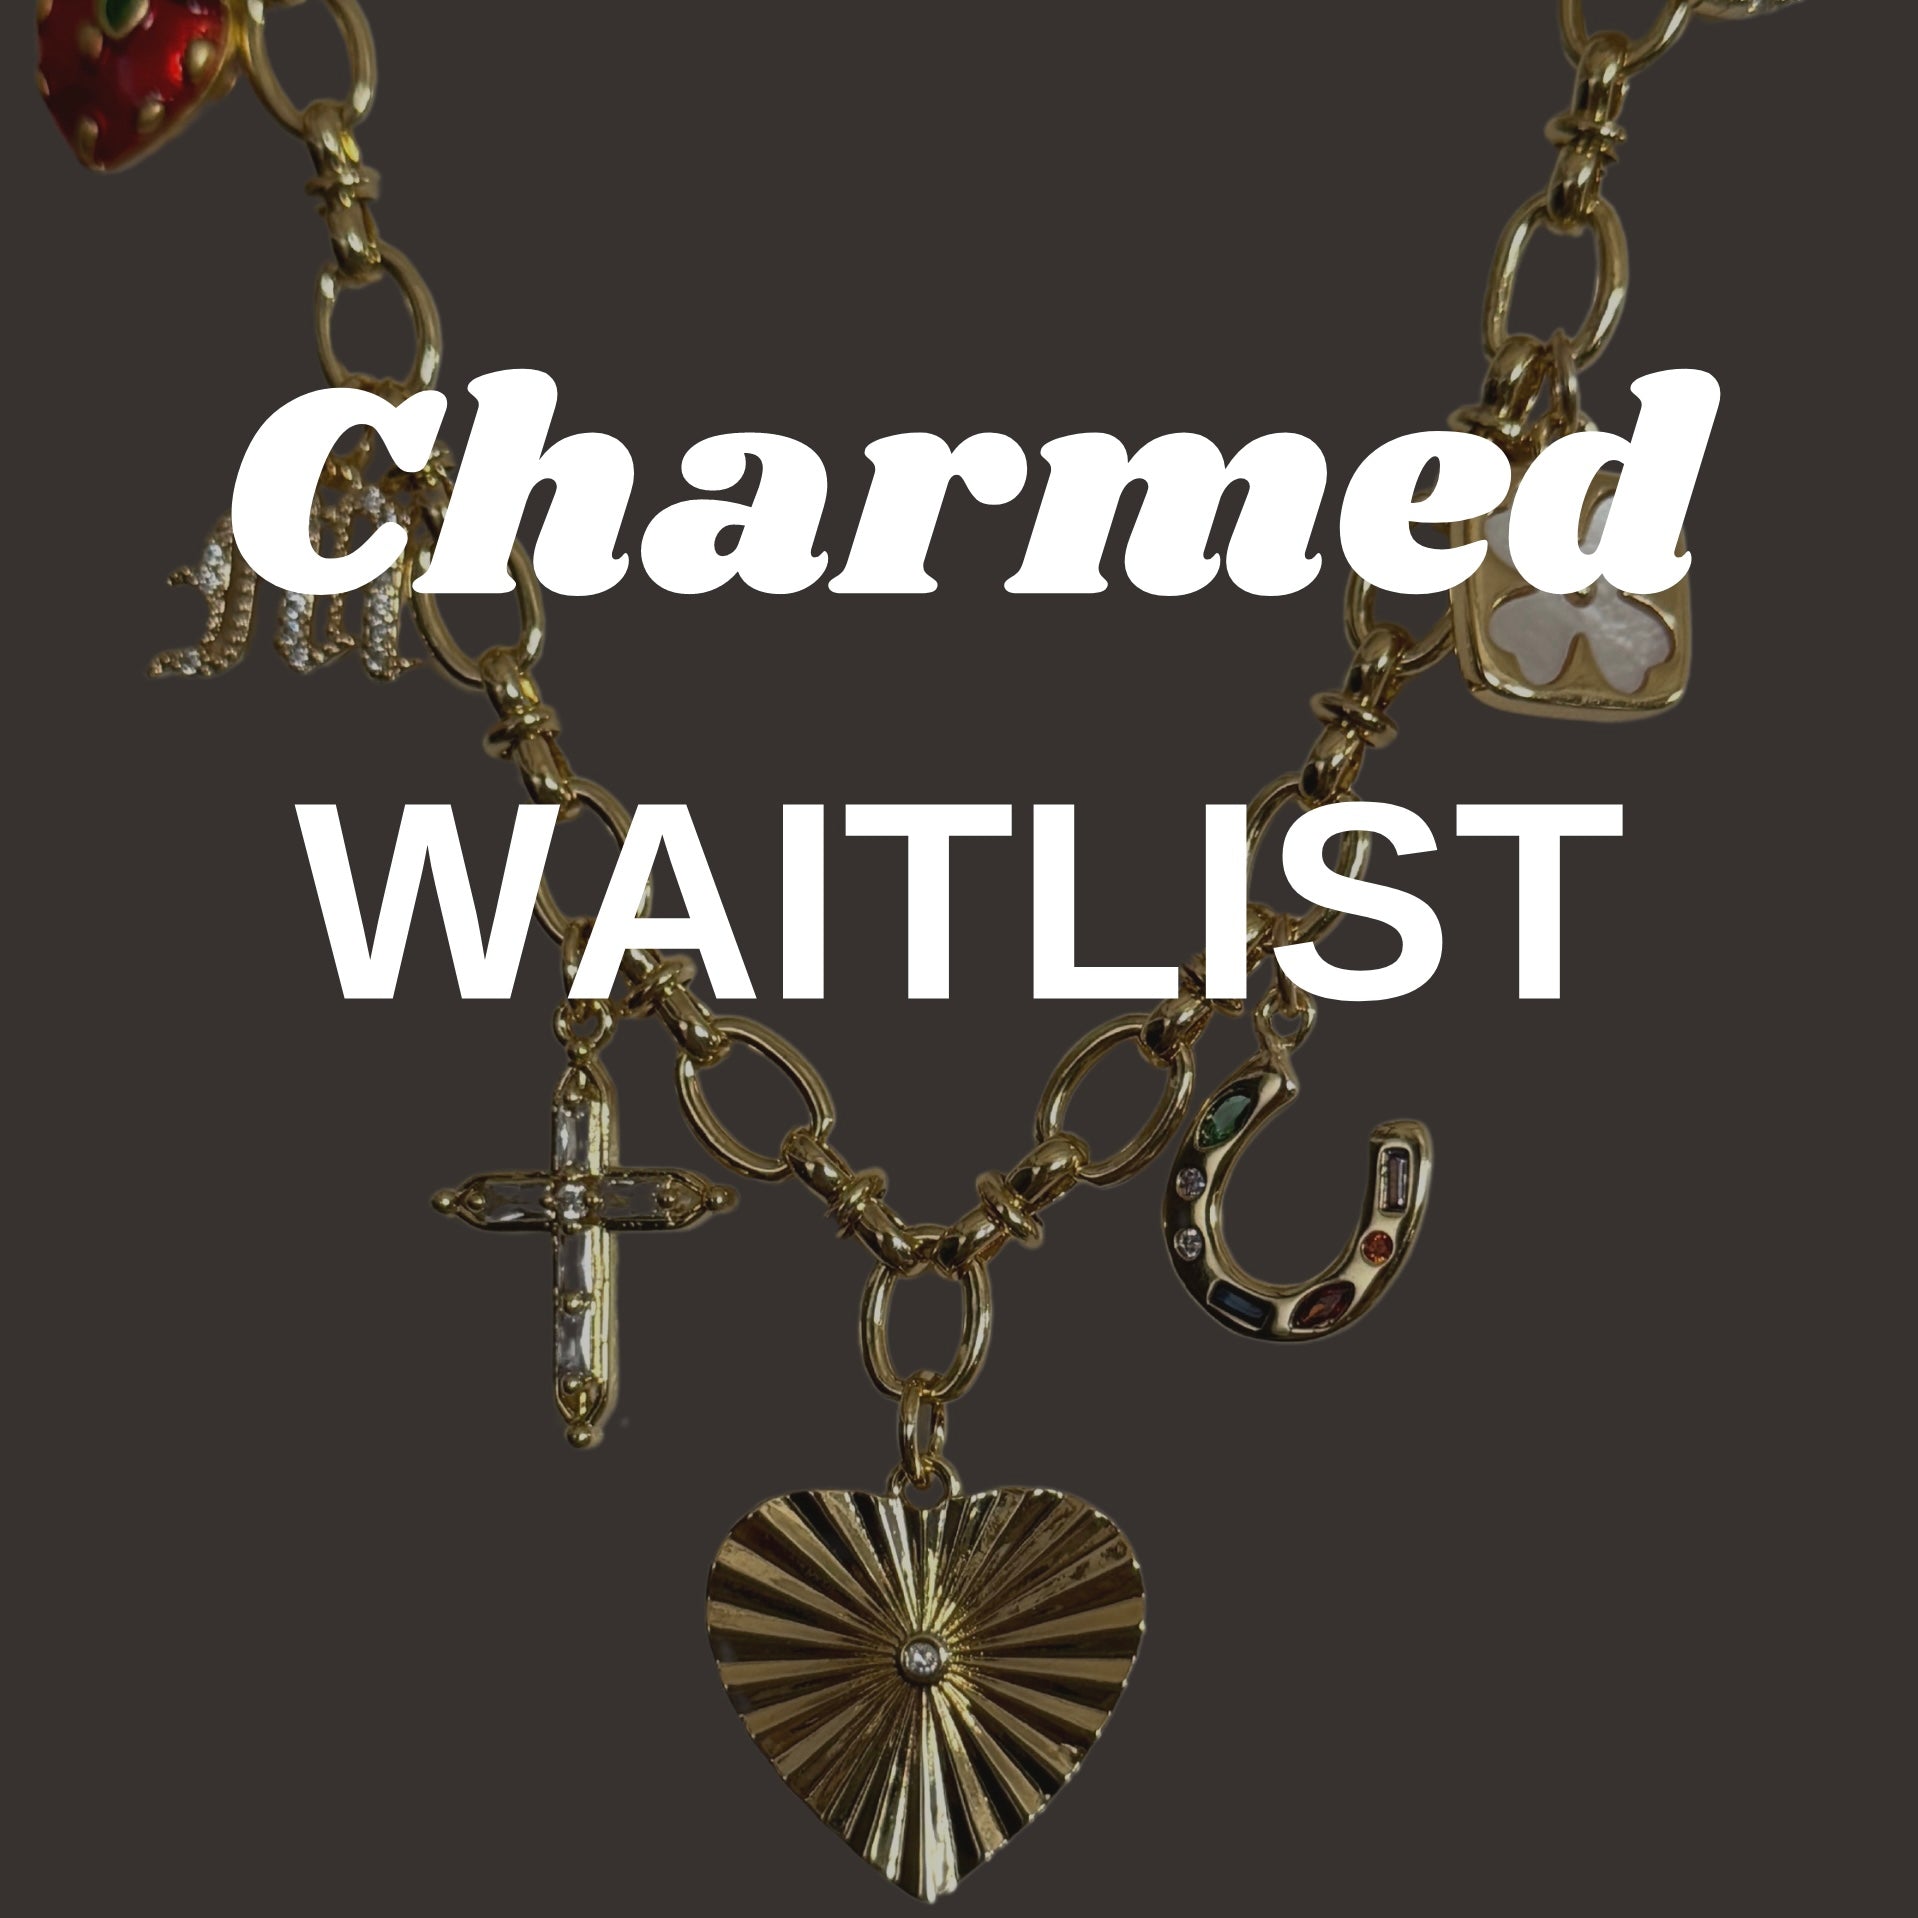 Custom Charm bar waitlist (Reopening first week of Aug)